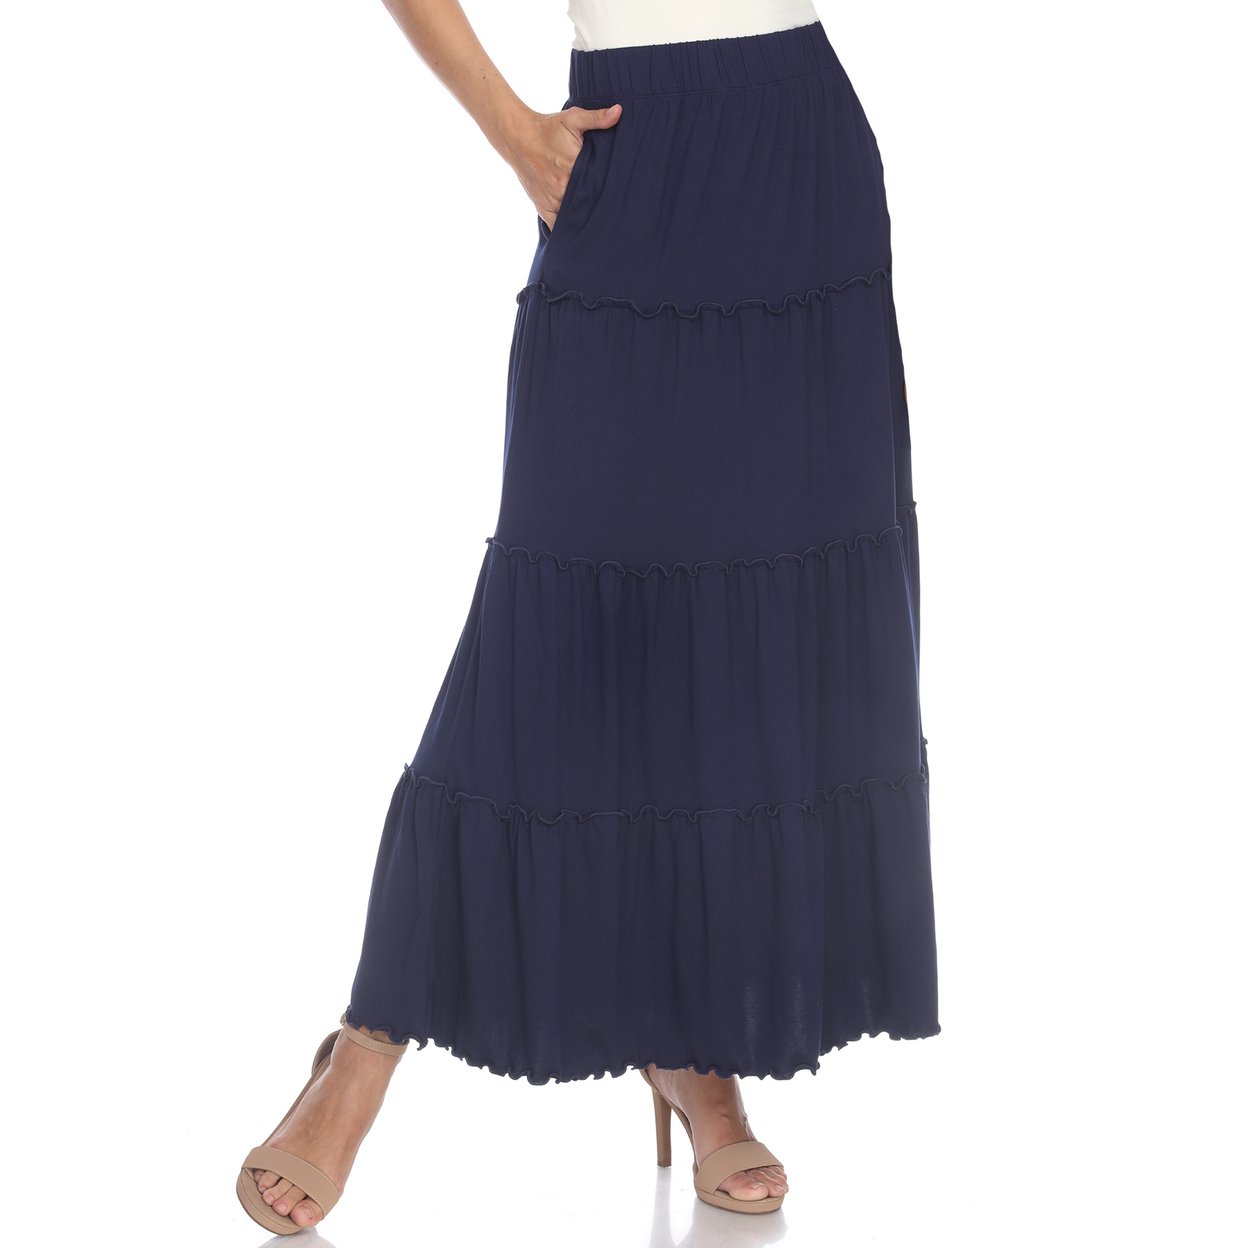 White Mark Women's Tiered Maxi Skirt With Pockets - Denim Blue, Large